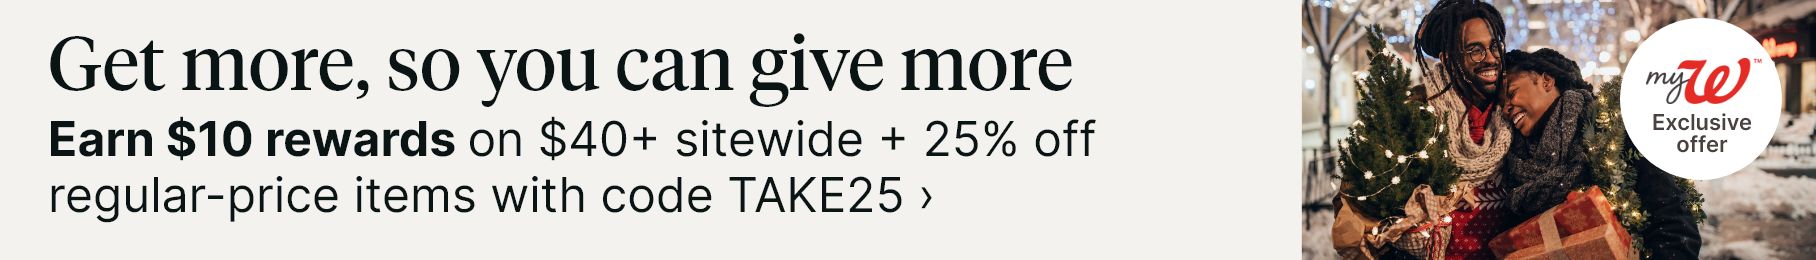 Get more, so you can give more. Earn $10 rewards on $40+ sitewide + 25% off regular-price items with code TAKE25. myW Exclusive offer.